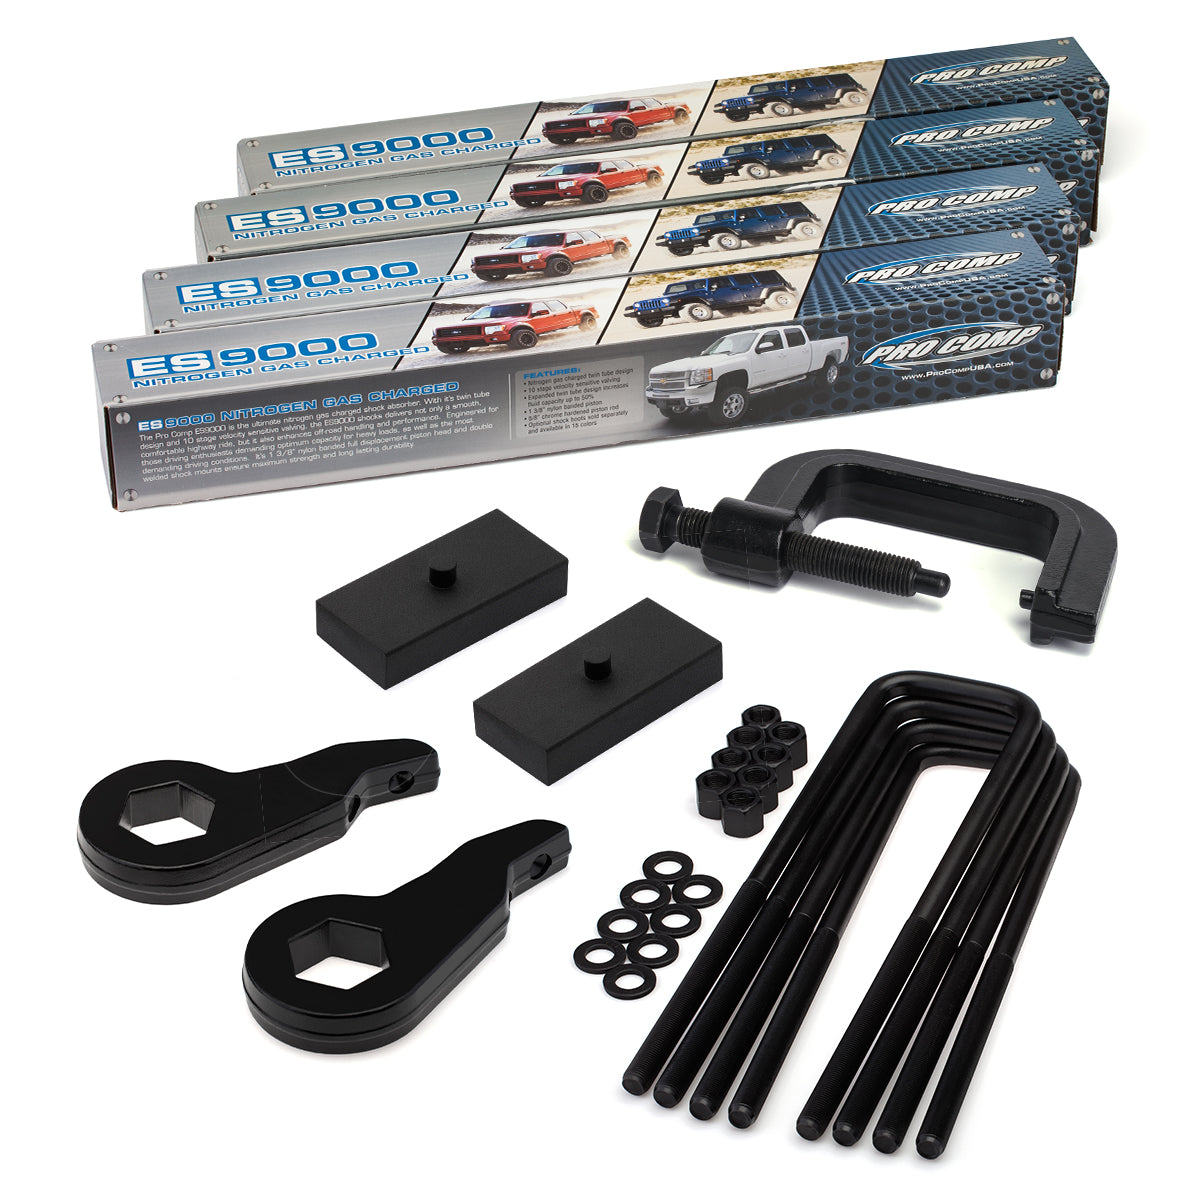 2001-2007 GMC Sierra 1500 HD Full Lift Kit with Extended Shocks and Torsion Key Unloading/Removal Tool